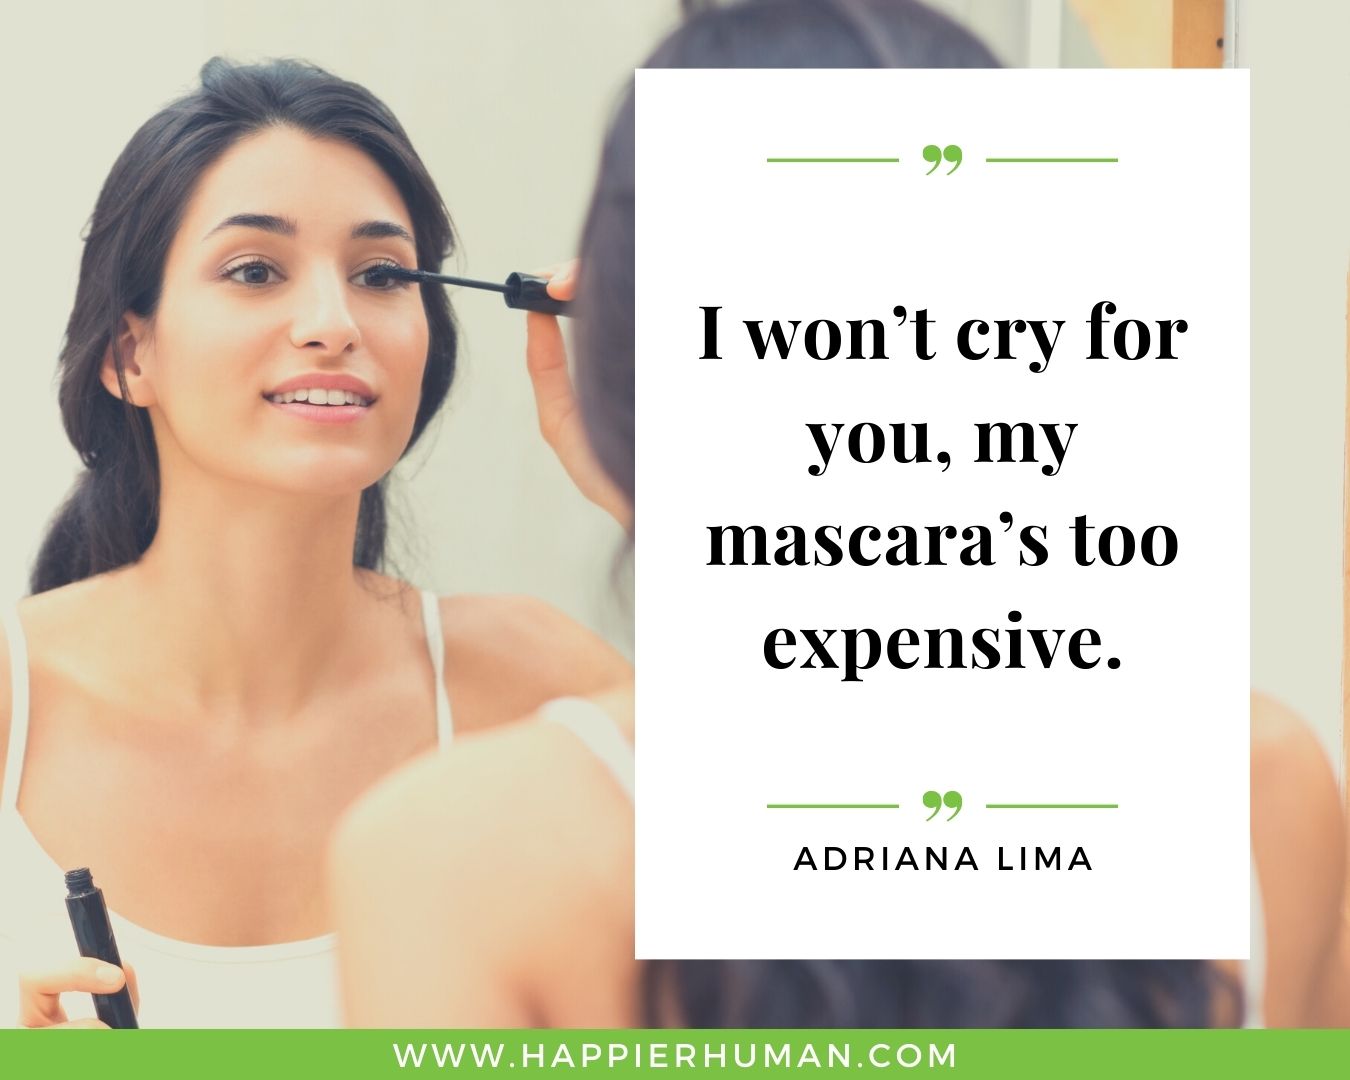 Haters Quotes - “I won’t cry for you, my mascara’s too expensive.” - Adriana Lima